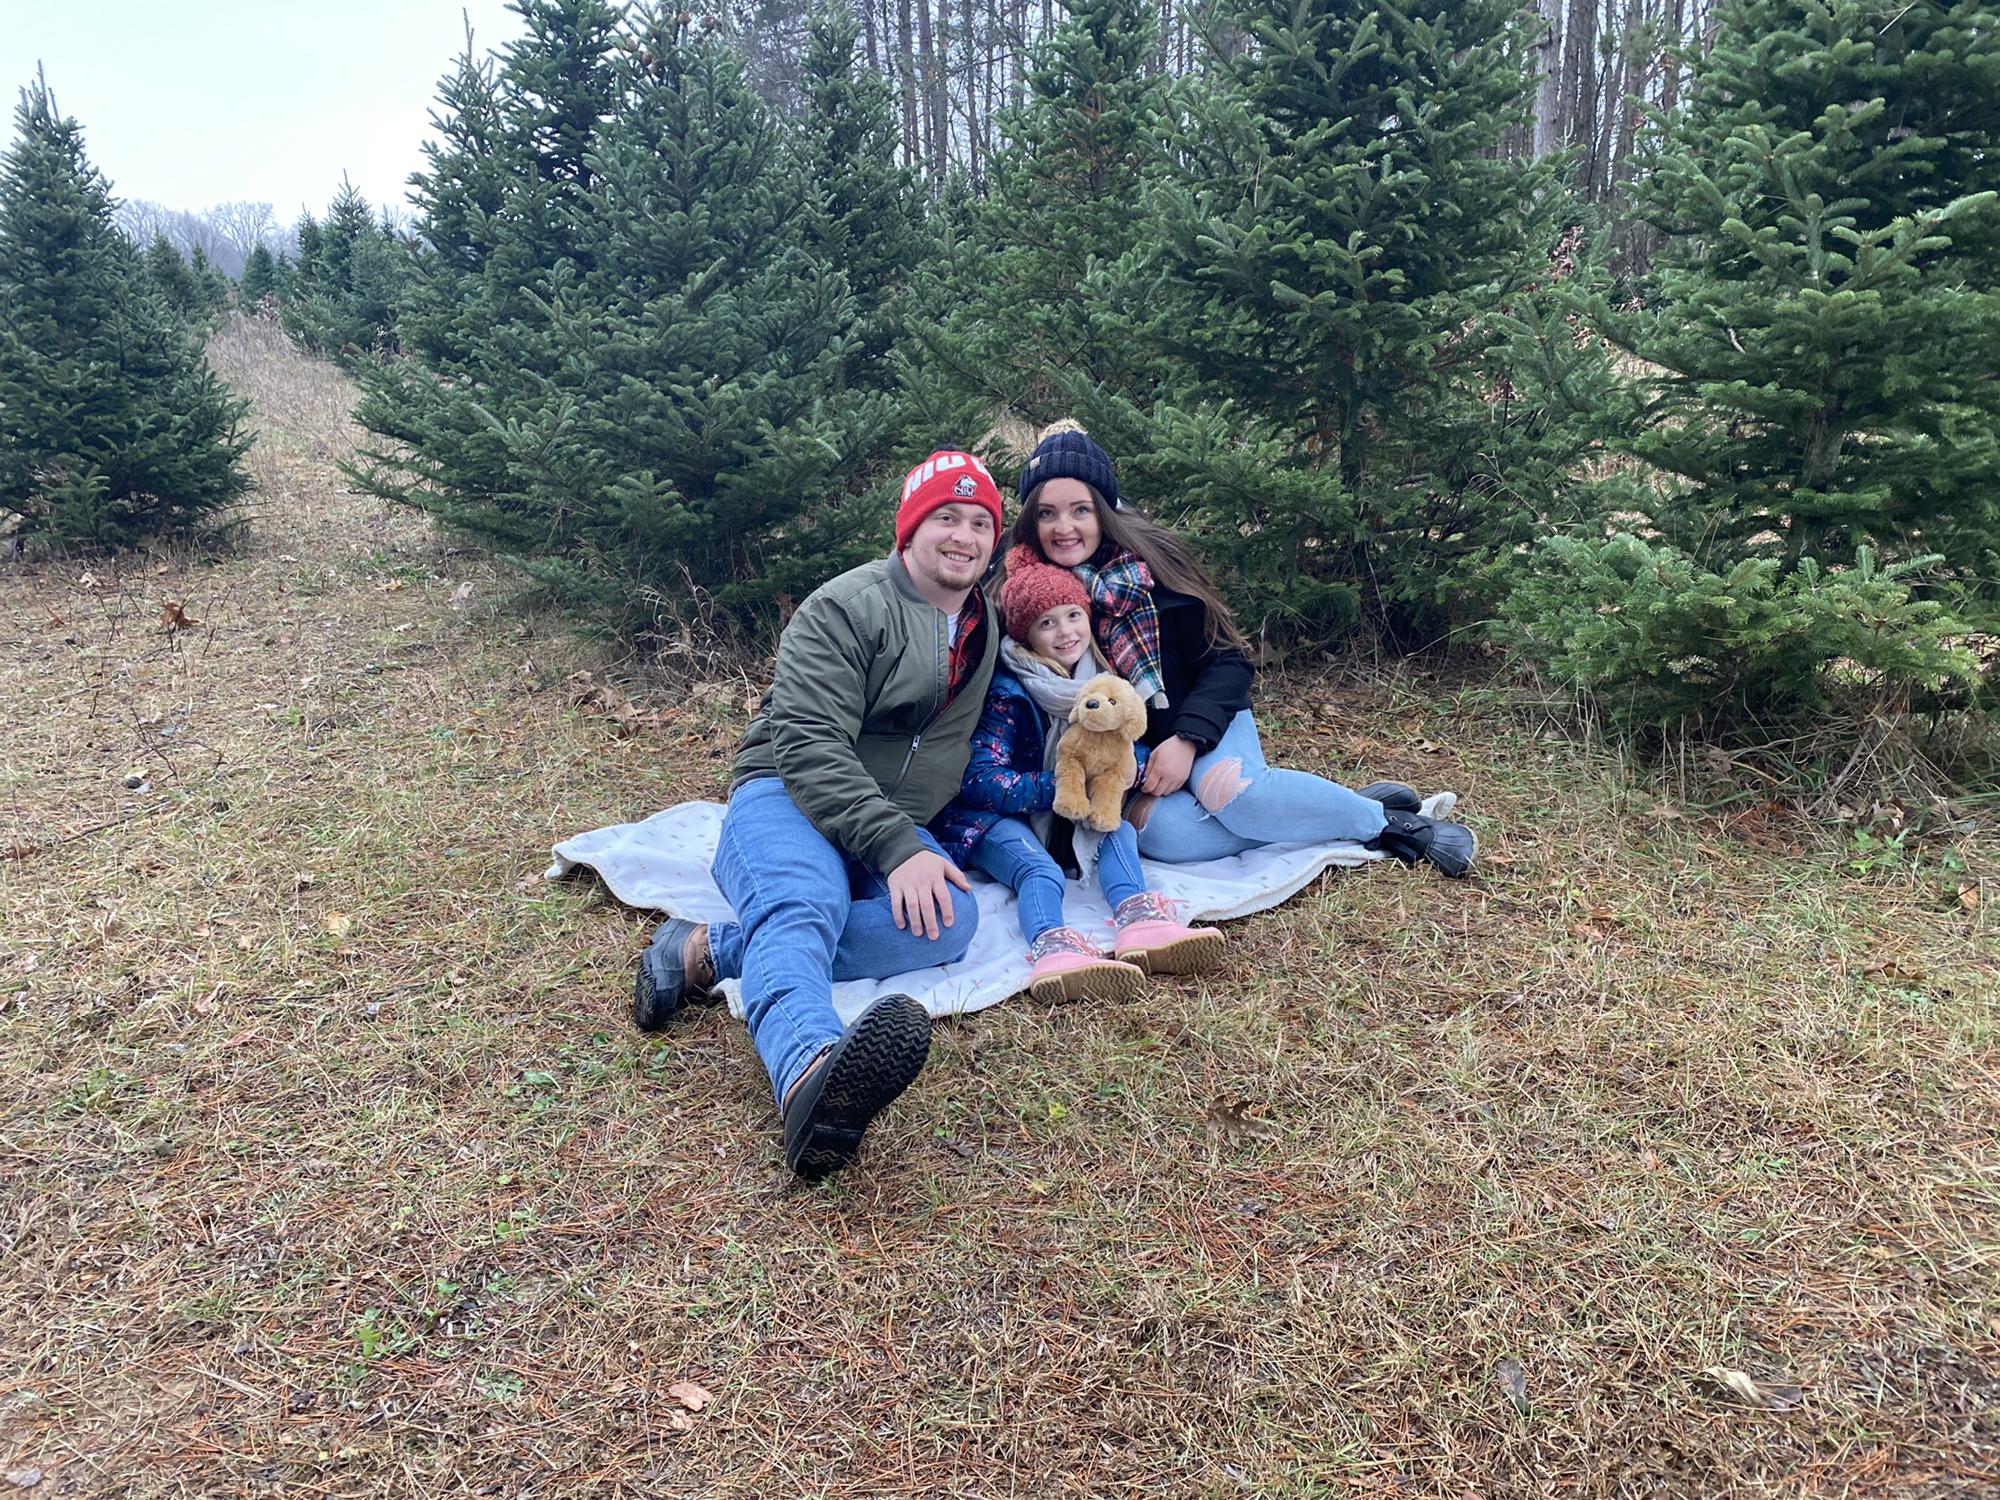 Visiting the Christmas tree farm for the first time